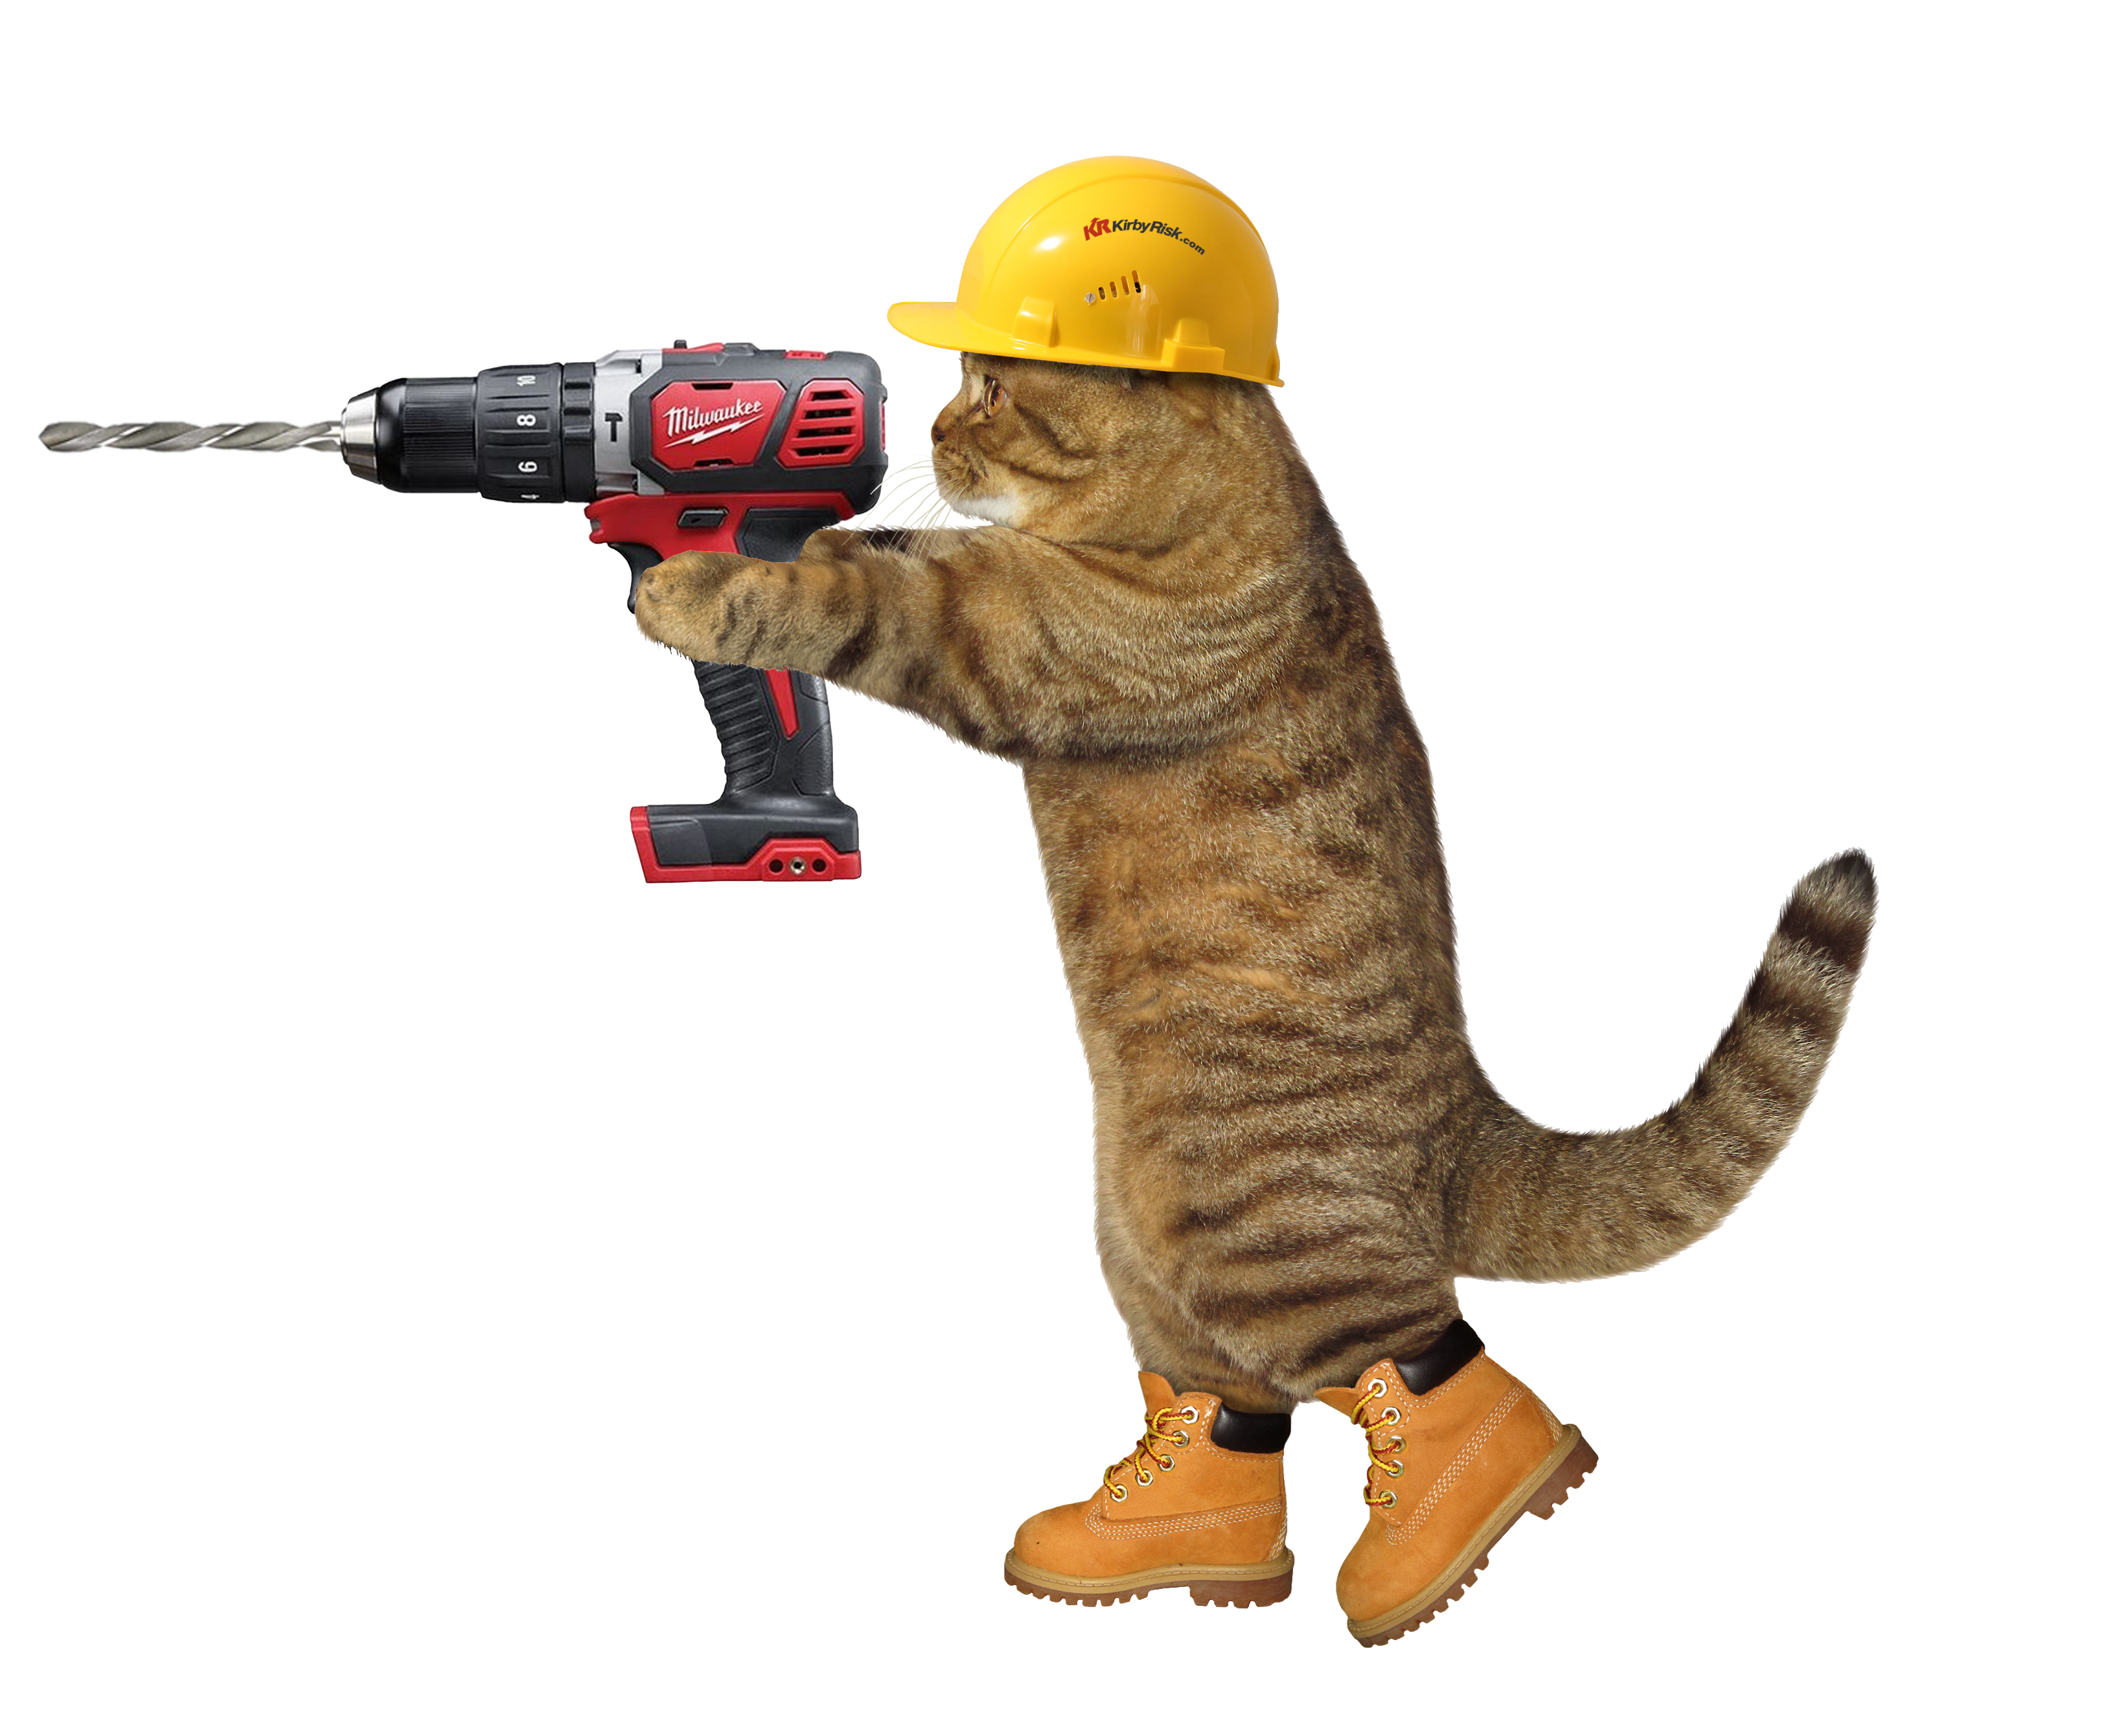 Cat wearing a hard had while using a drill.